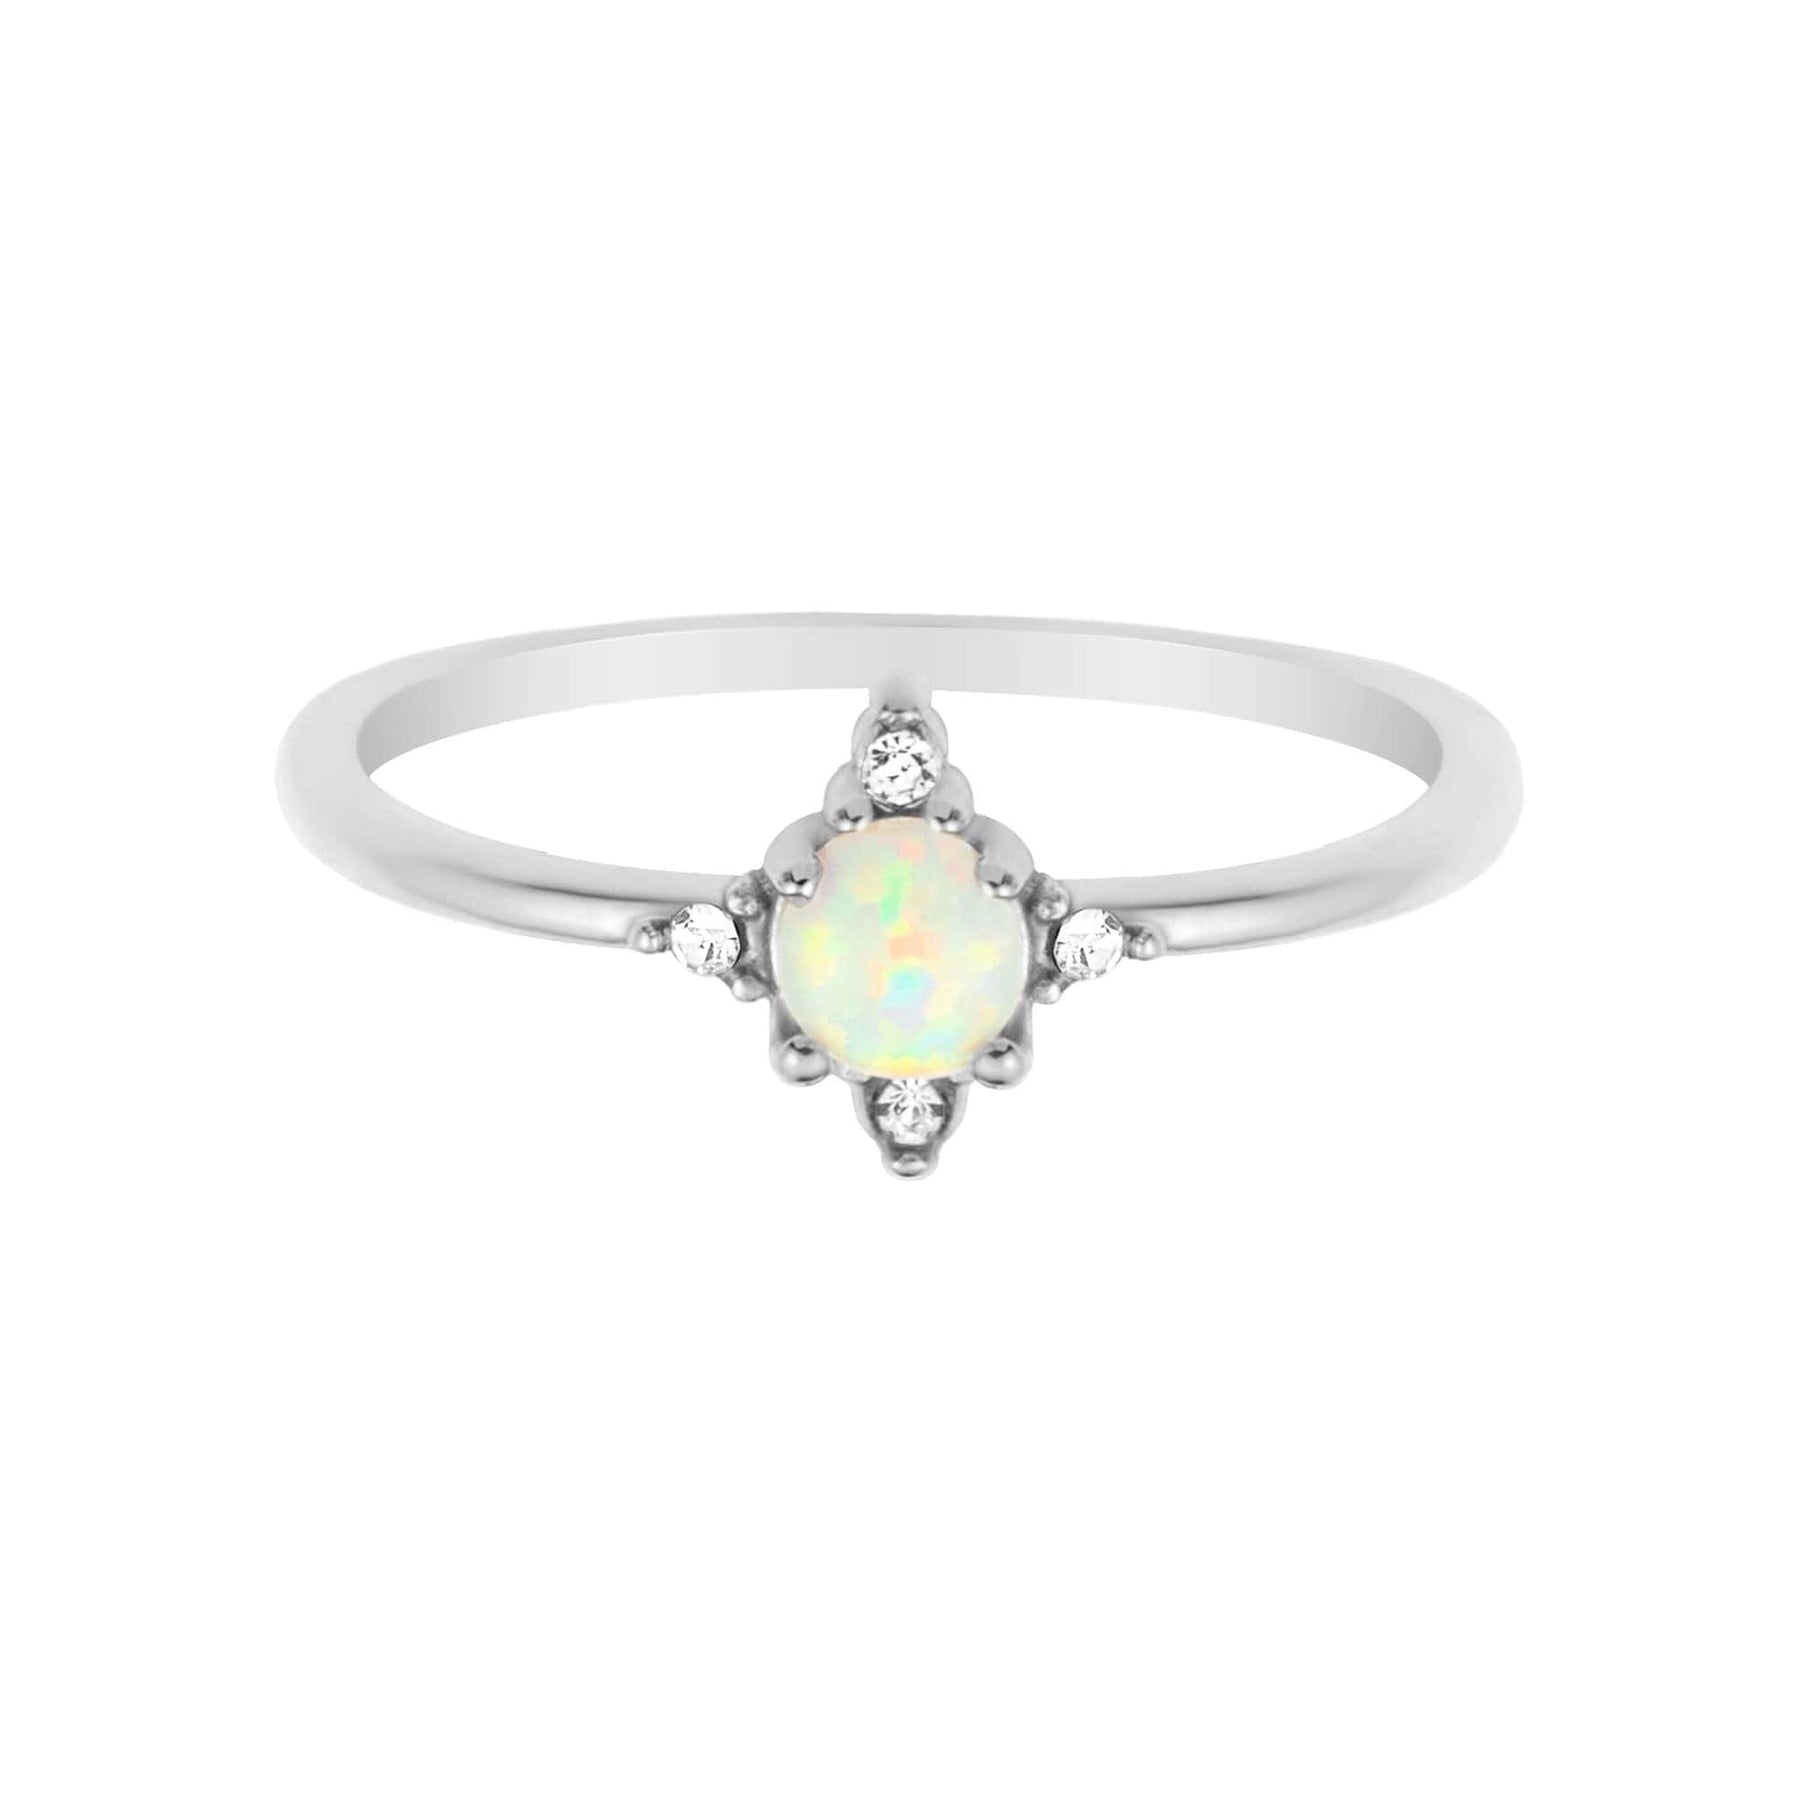 BohoMoon Stainless Steel Honour Opal Ring Silver / US 6 / UK L / EUR 51 (small)